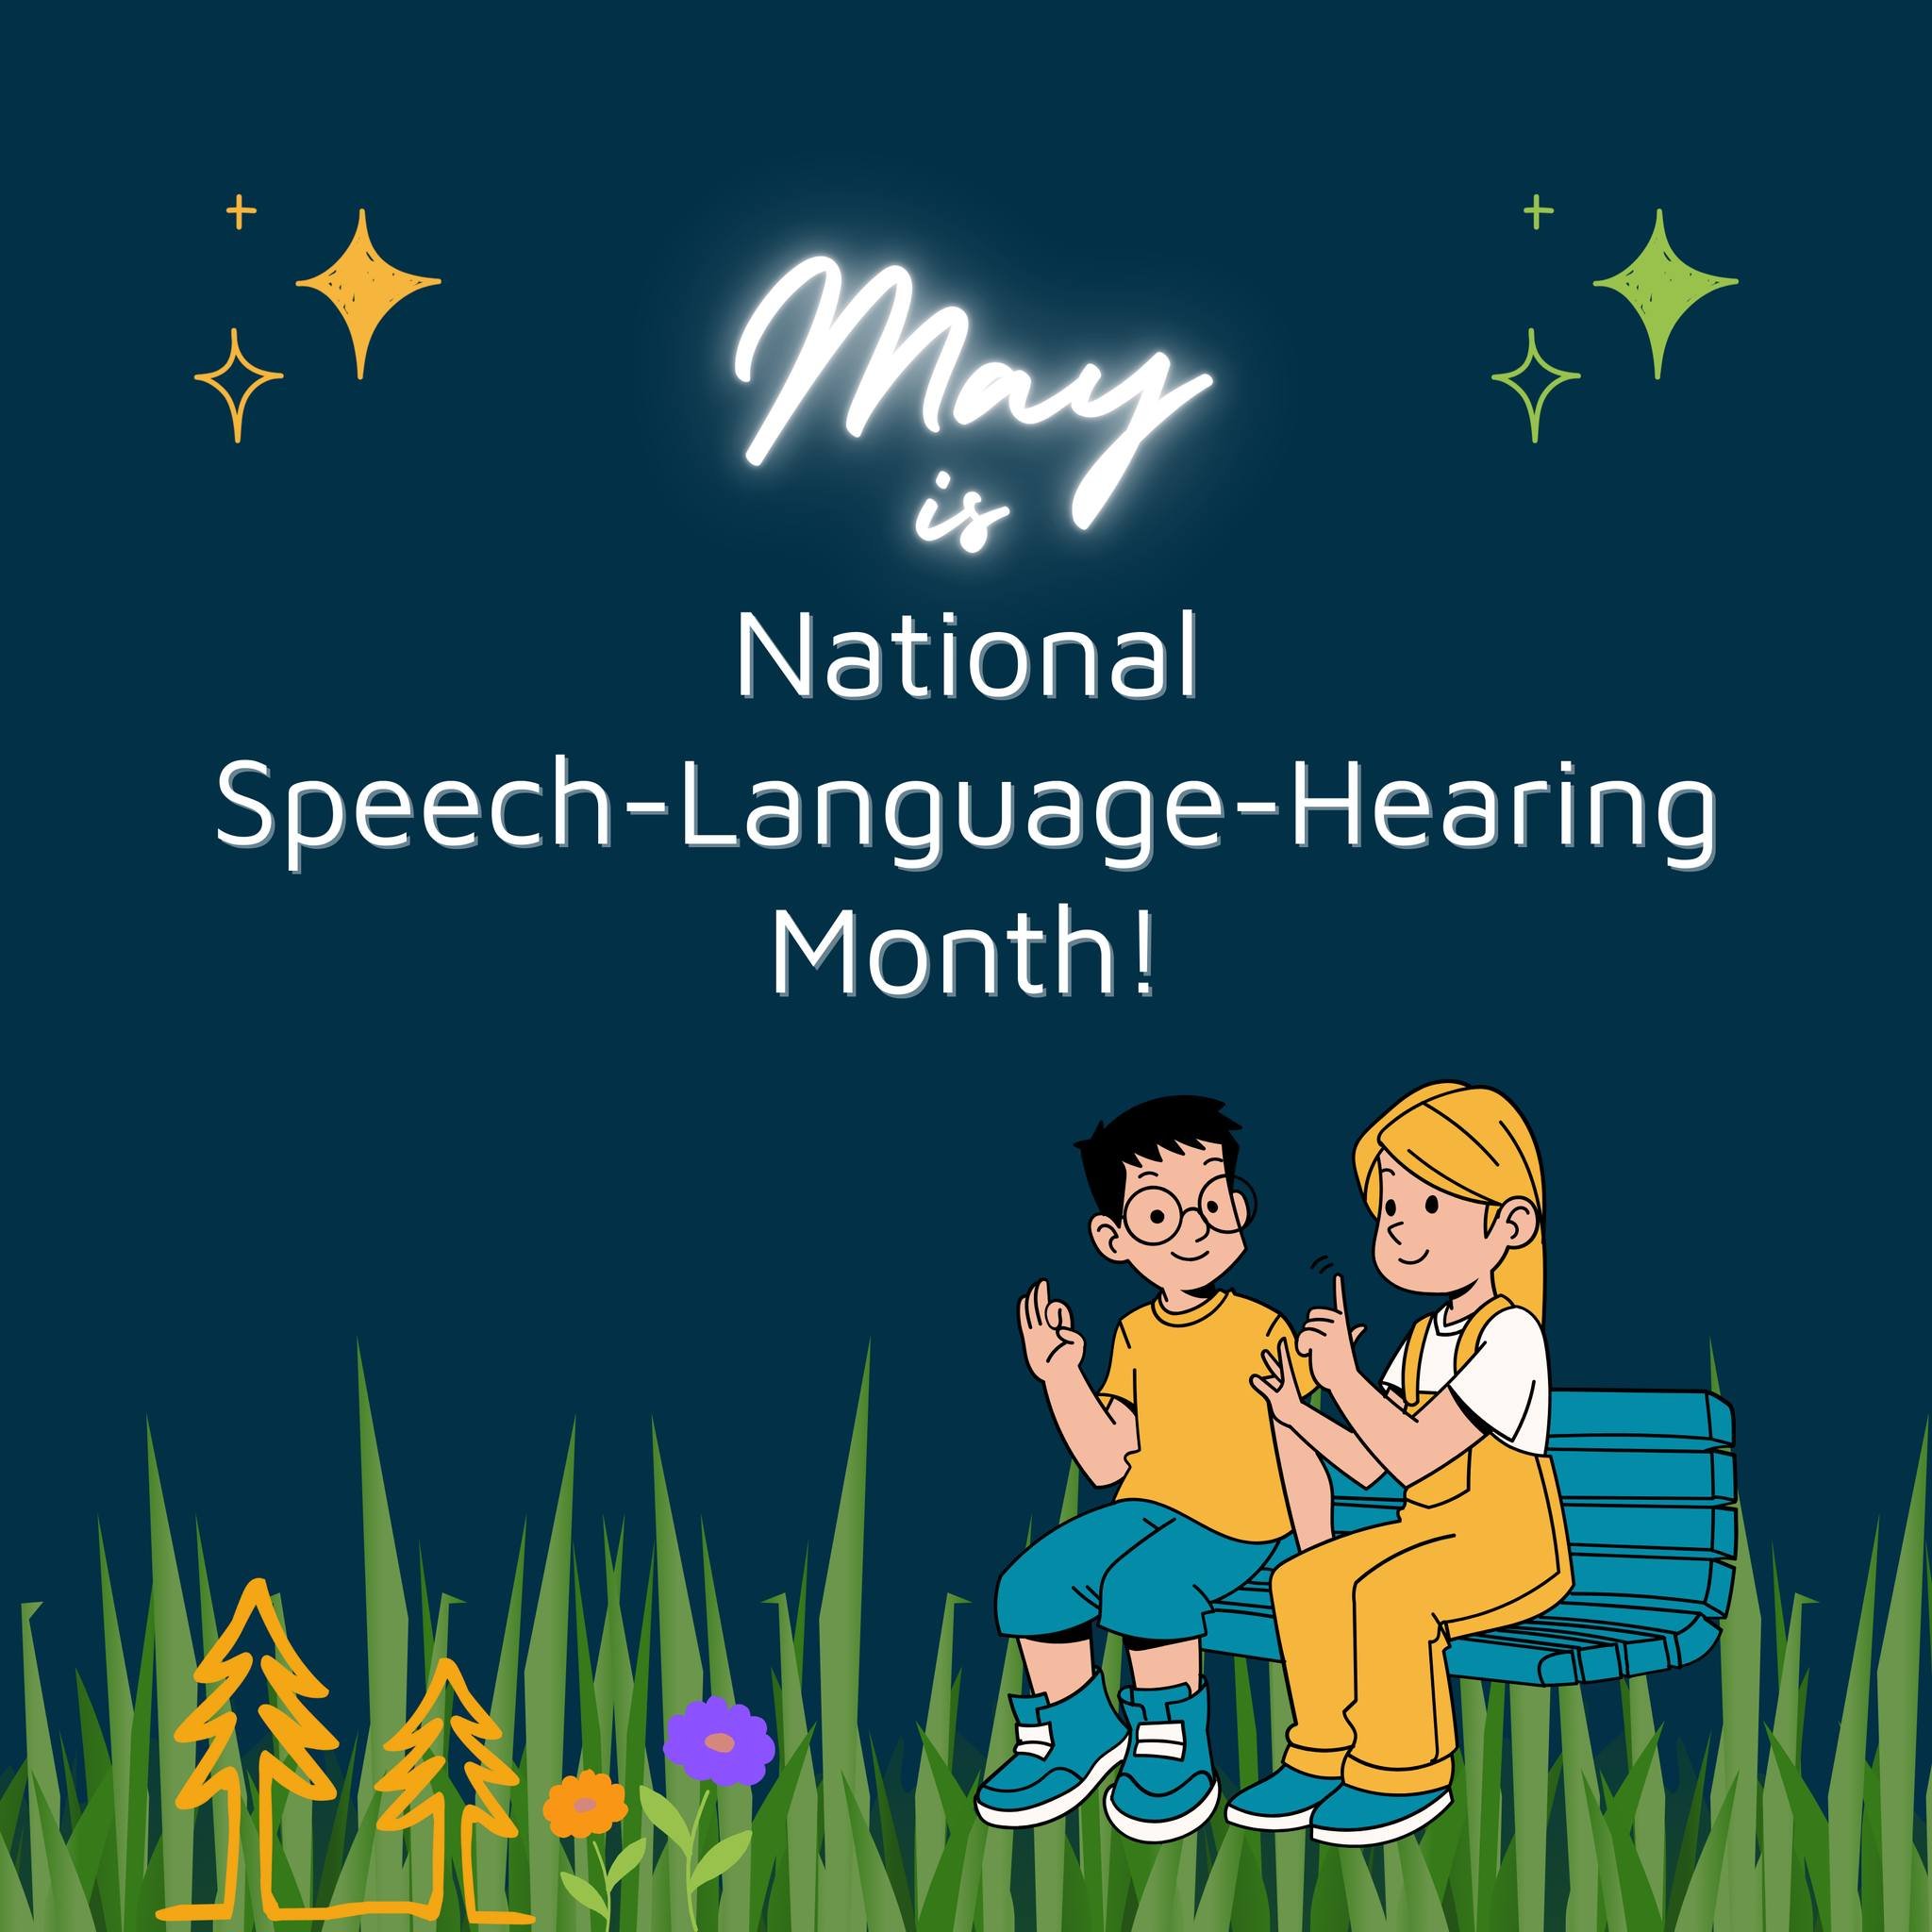 Each May, National Speech-Language-Hearing Month provides an opportunity to raise awareness about communication disorders and the role of ASHA (American Speech-Language-Hearing Association) members in providing life-altering treatment. 🗣️
.
During t